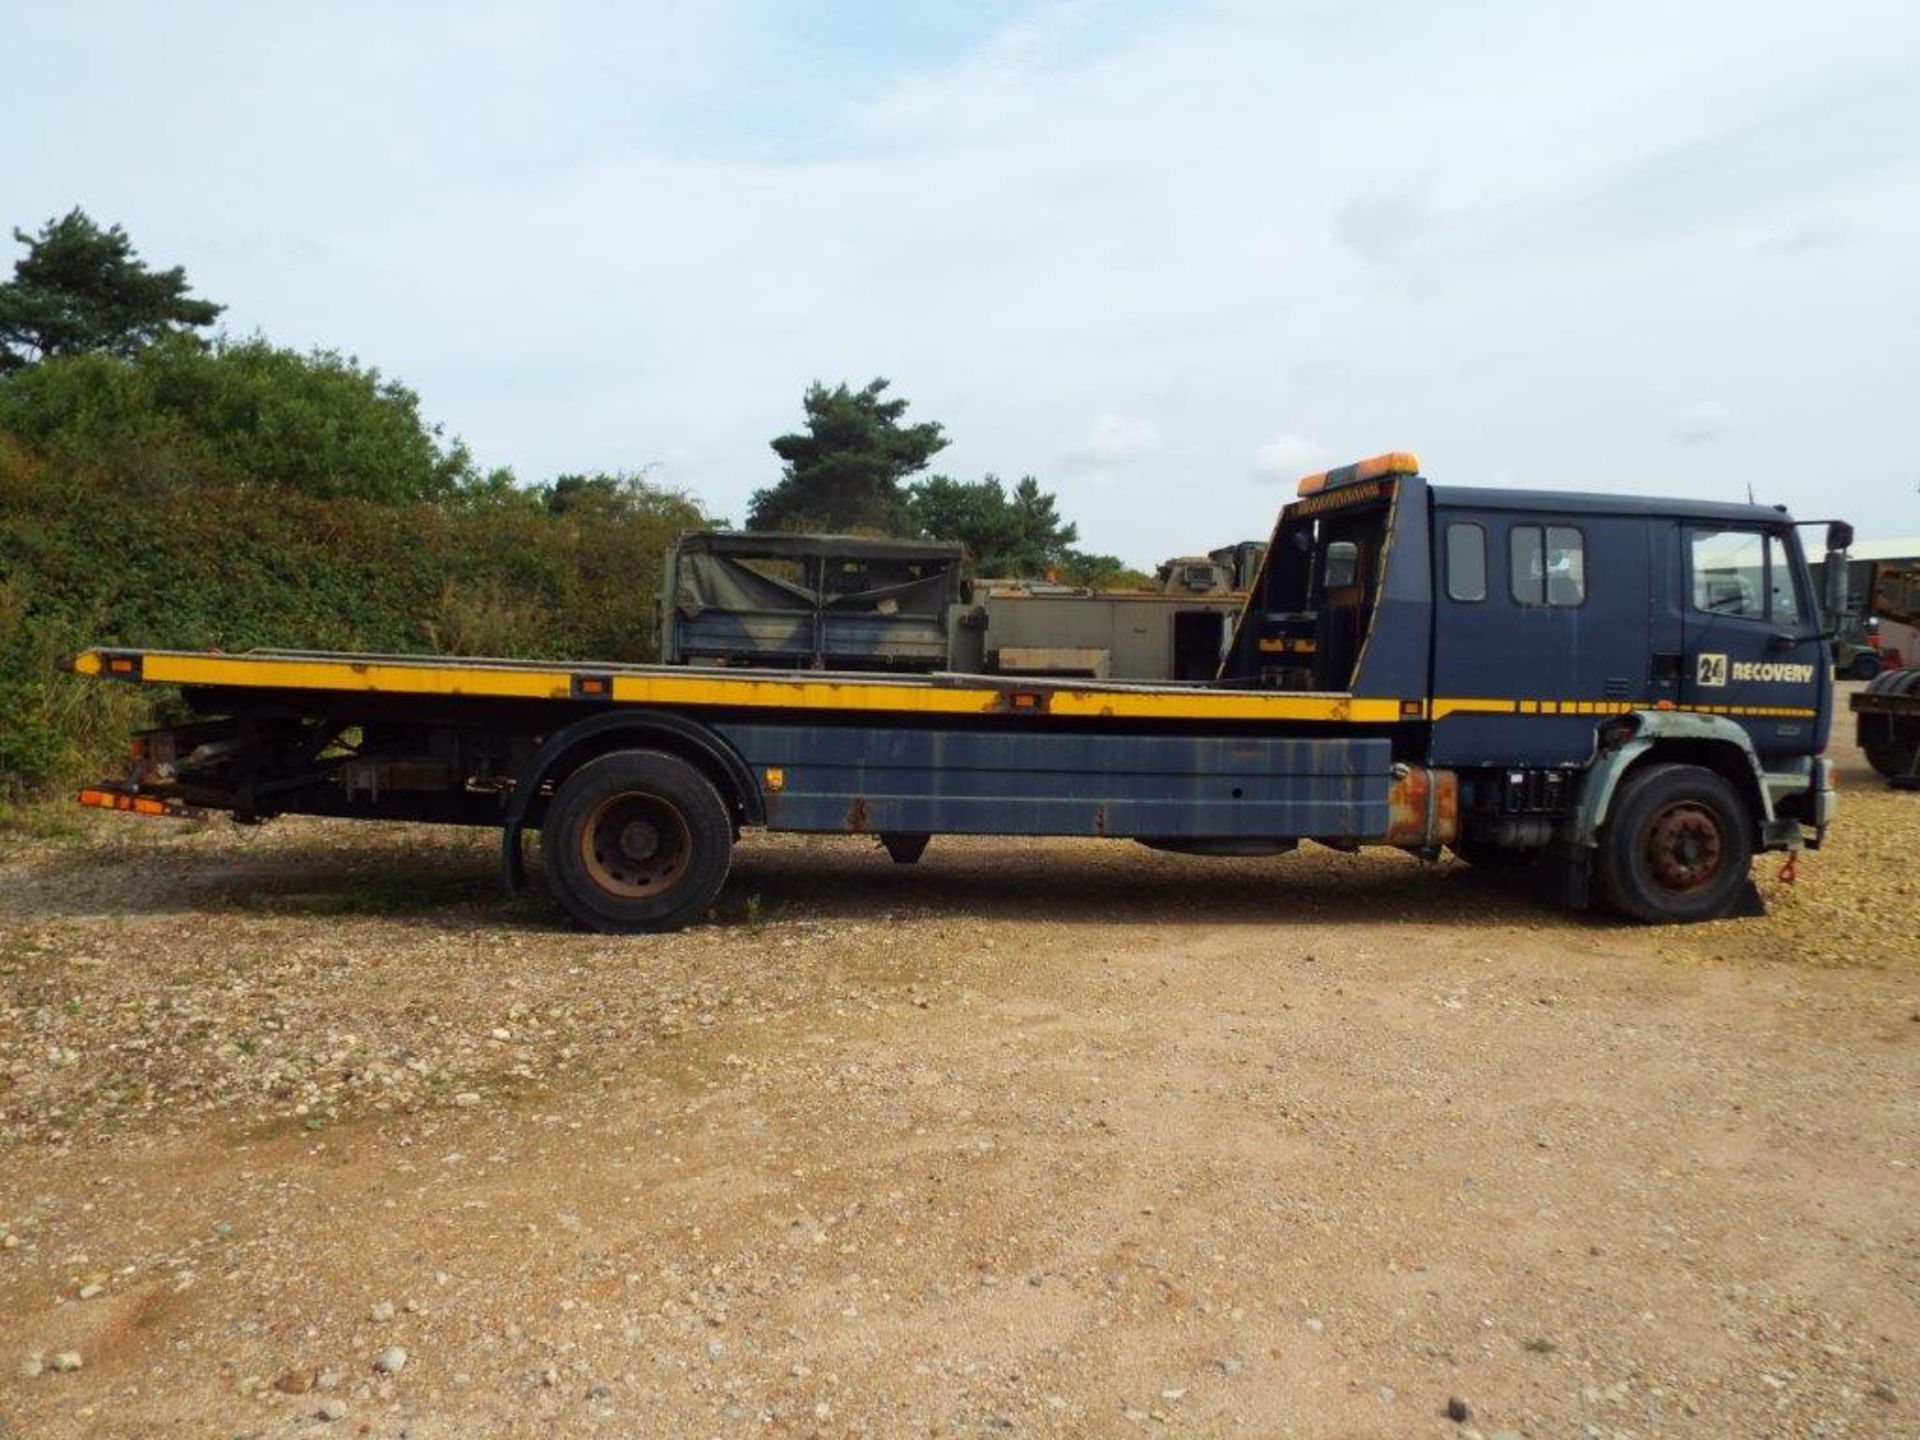 Leyland DAF 55 210 Crew Cab 18T Tilt and Slide Recovery Vehicle with Underlift and 2 x Winches - Image 8 of 32